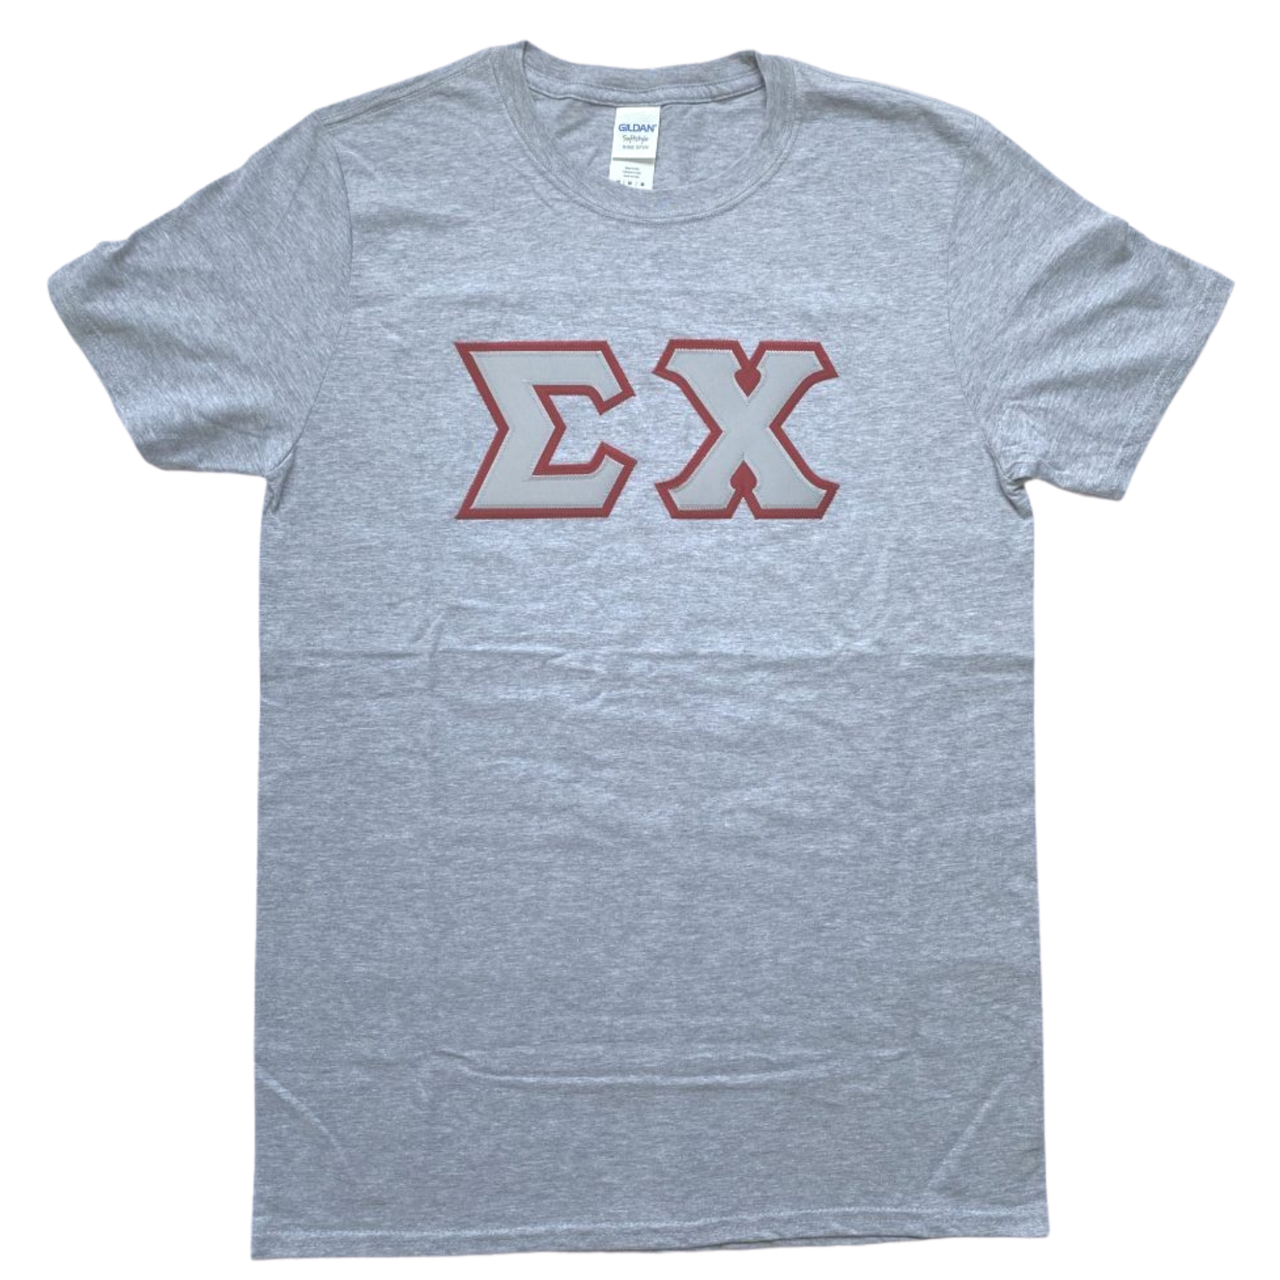 Sigma Chi Stitched Letter T-Shirt | Sport Grey | Gray with Burgundy Border